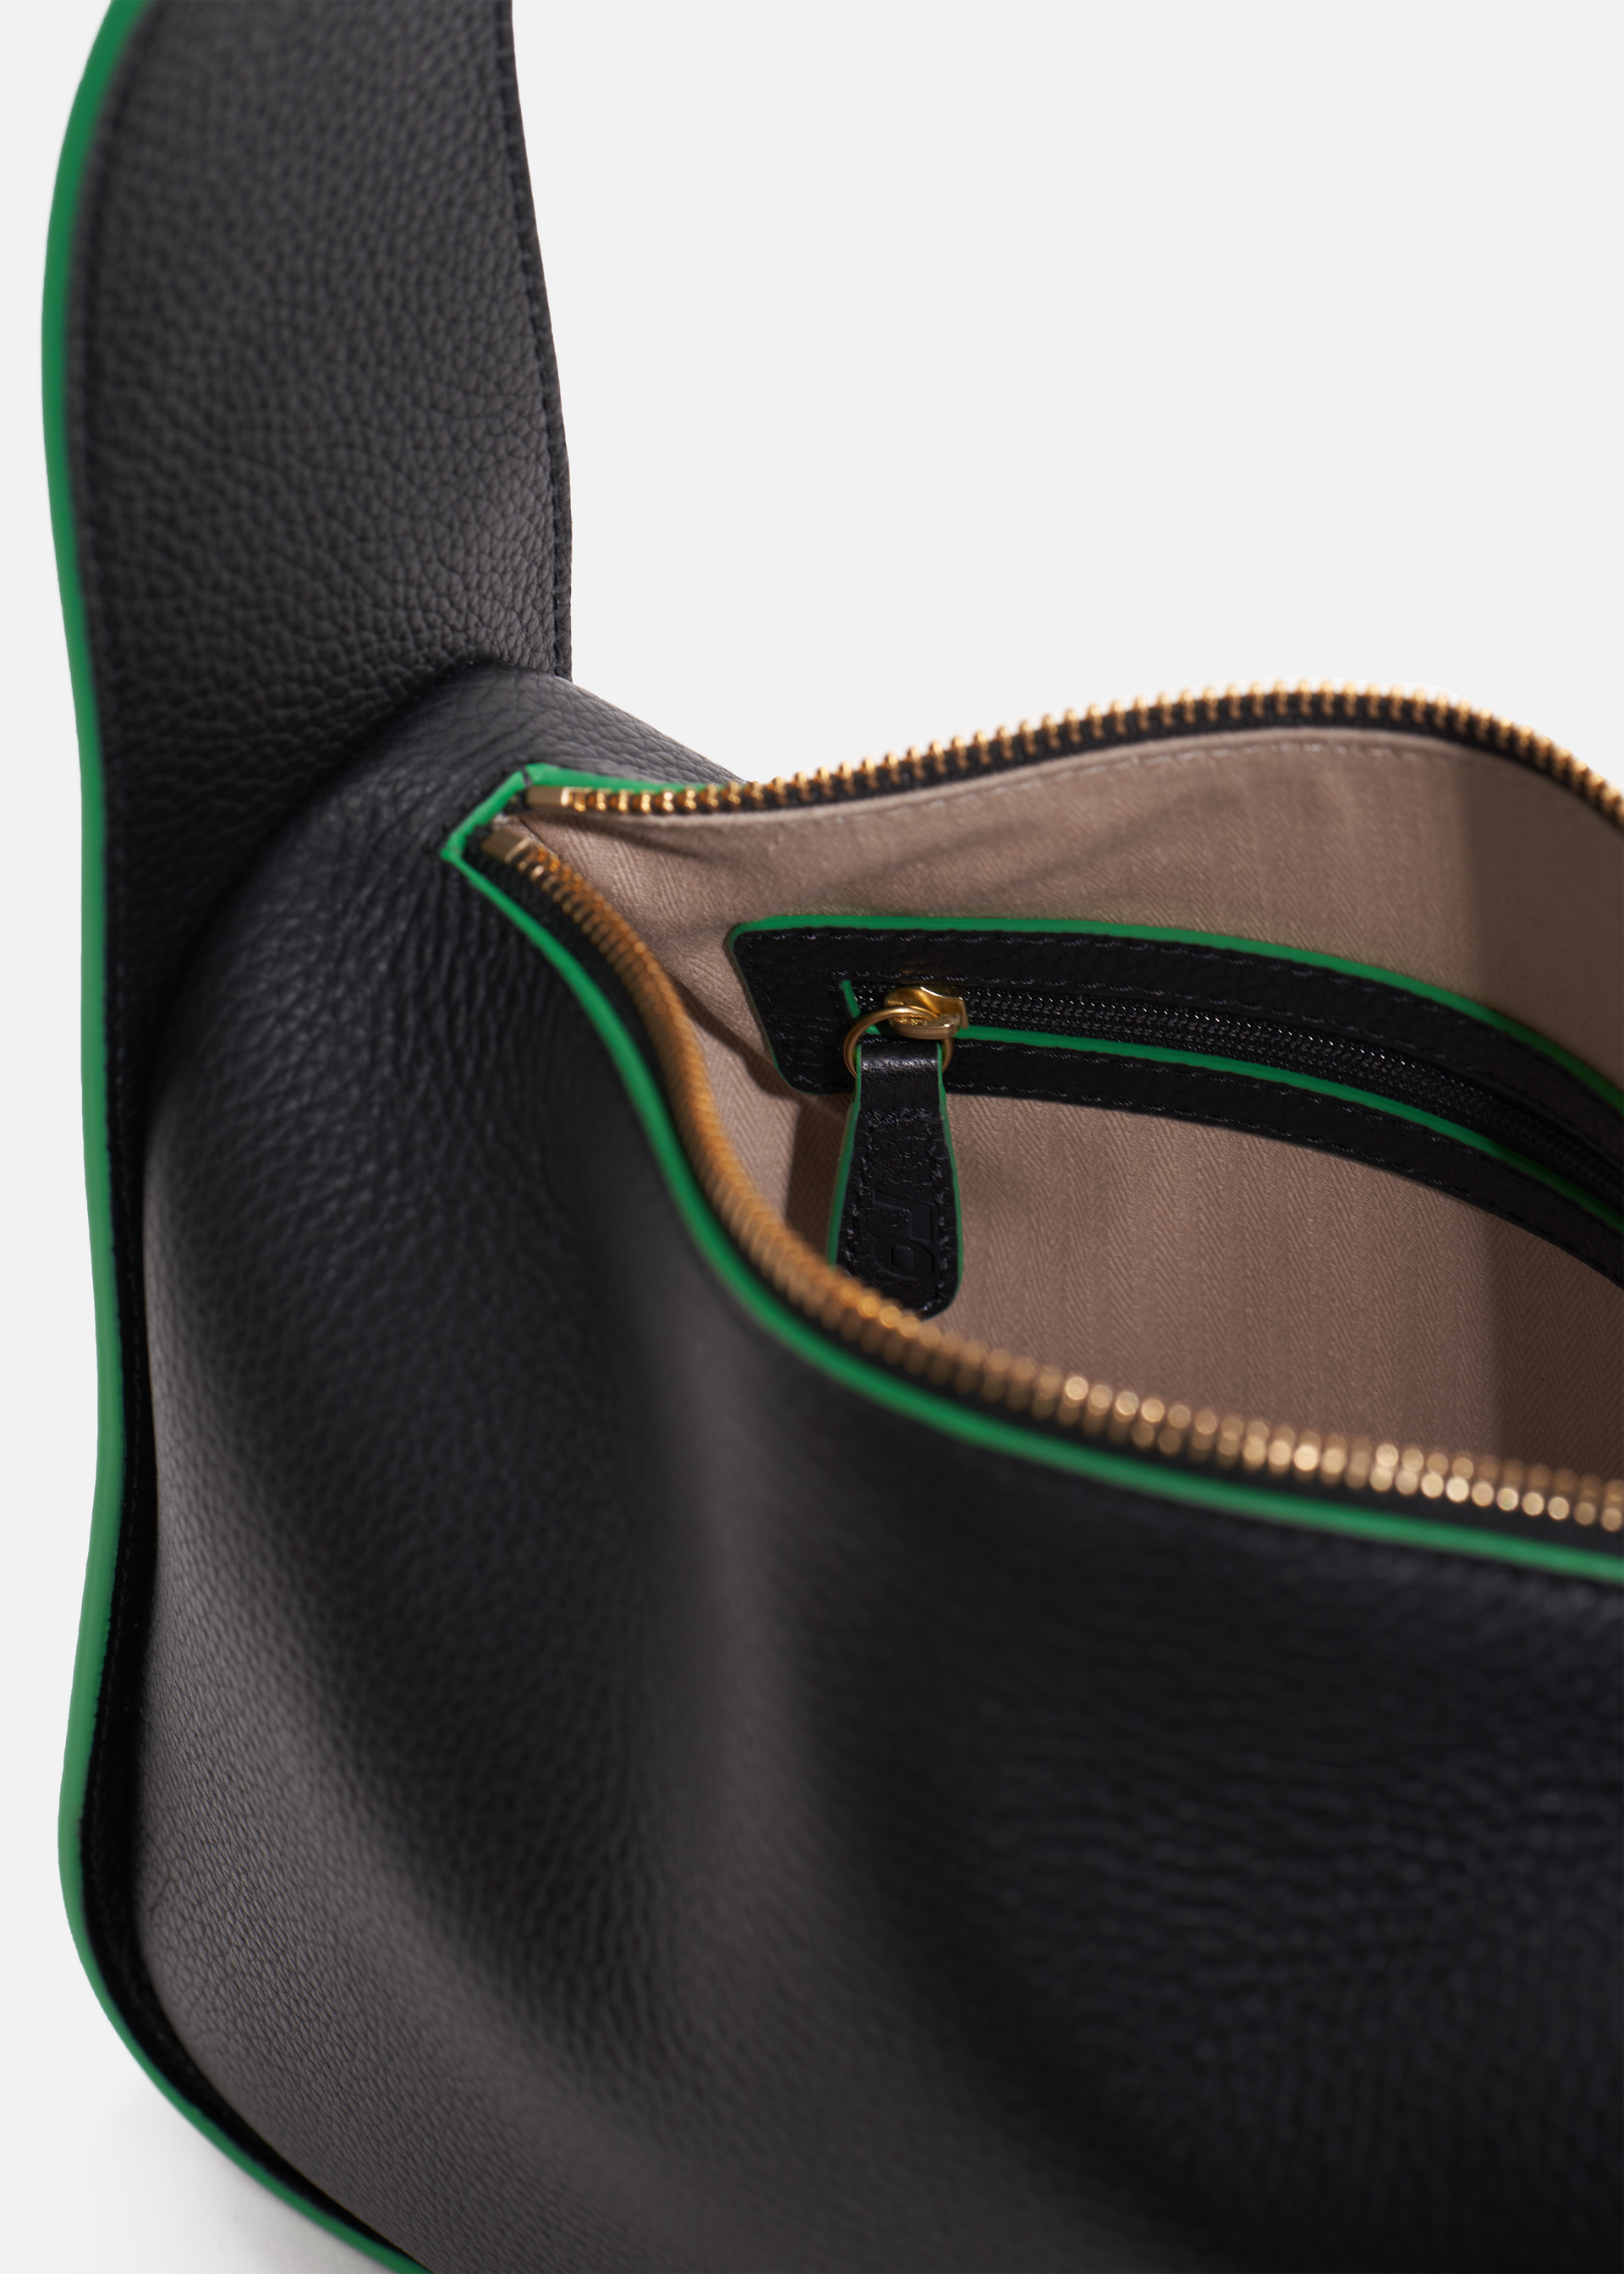 Grete pebble leather shoulder bag in black with green edge paint